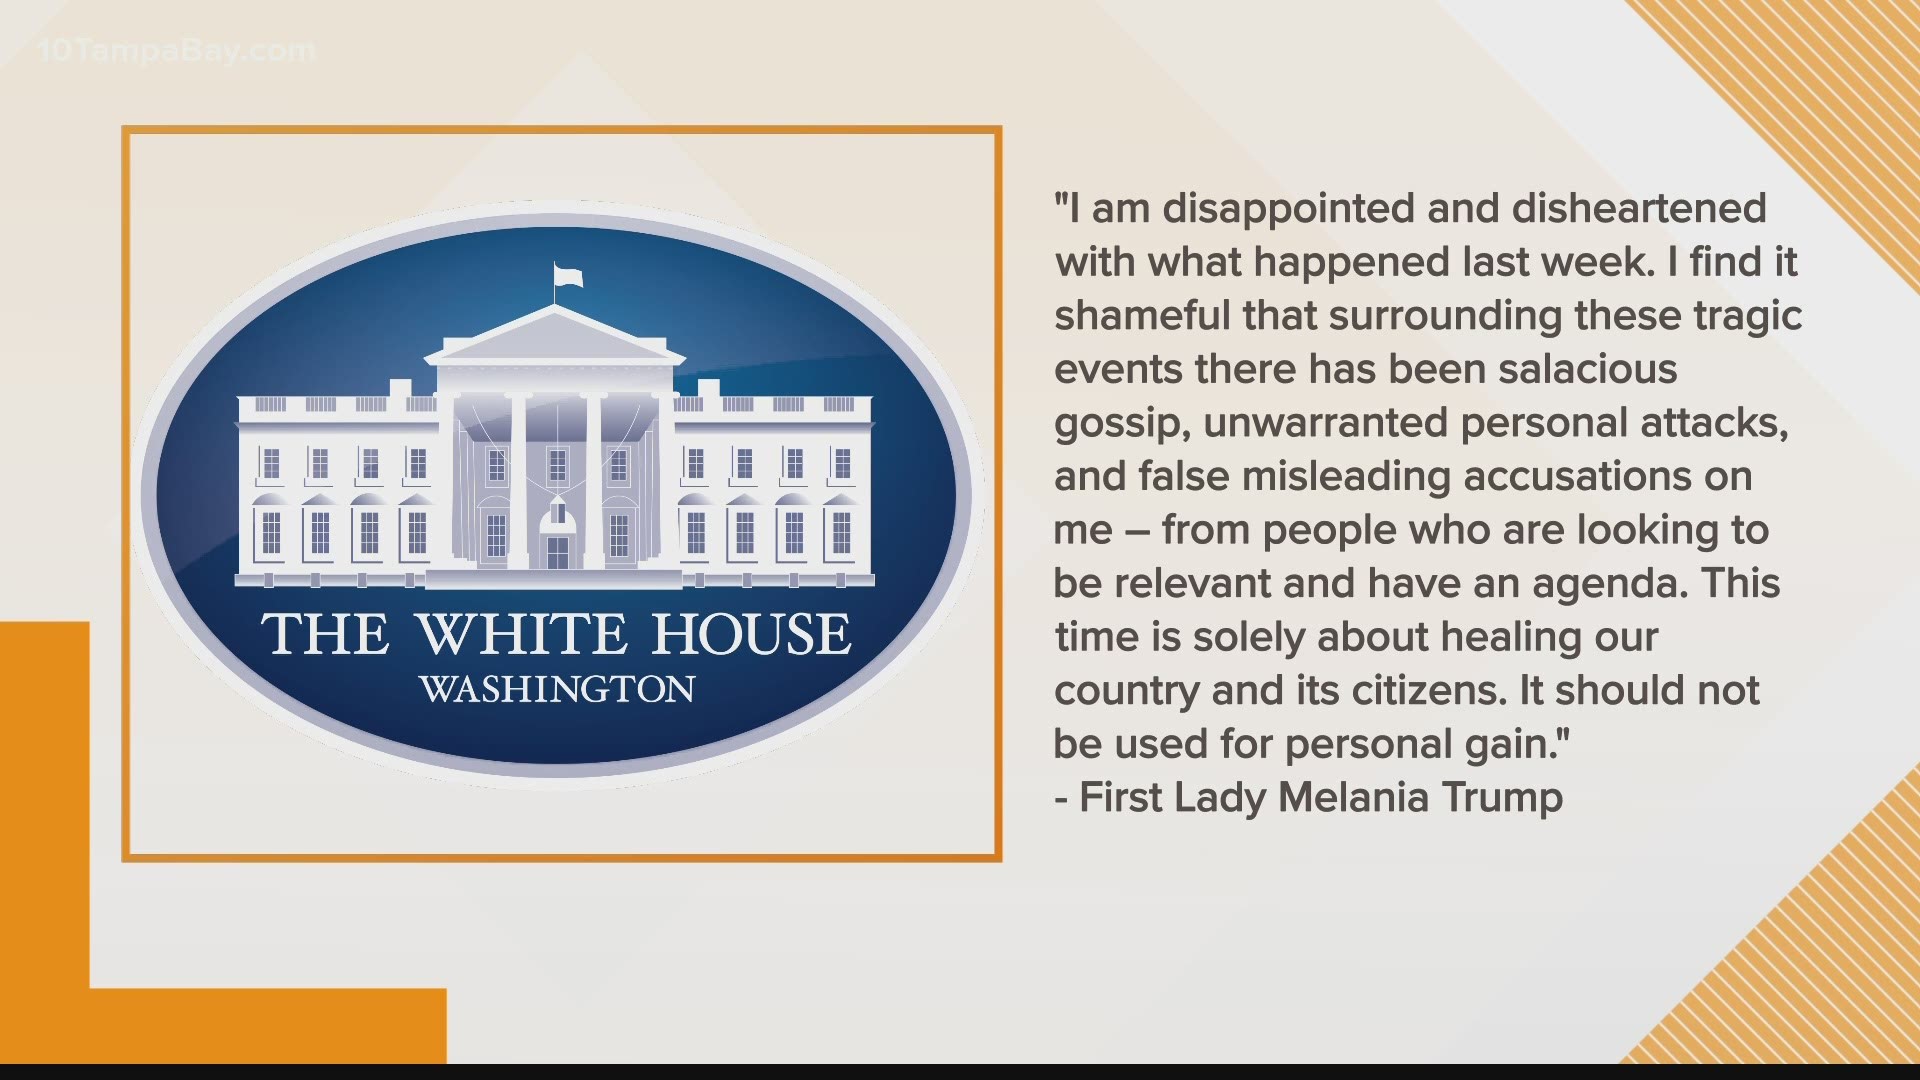 The first lady said she was 'disheartened and disappointed' at Wednesday's events.